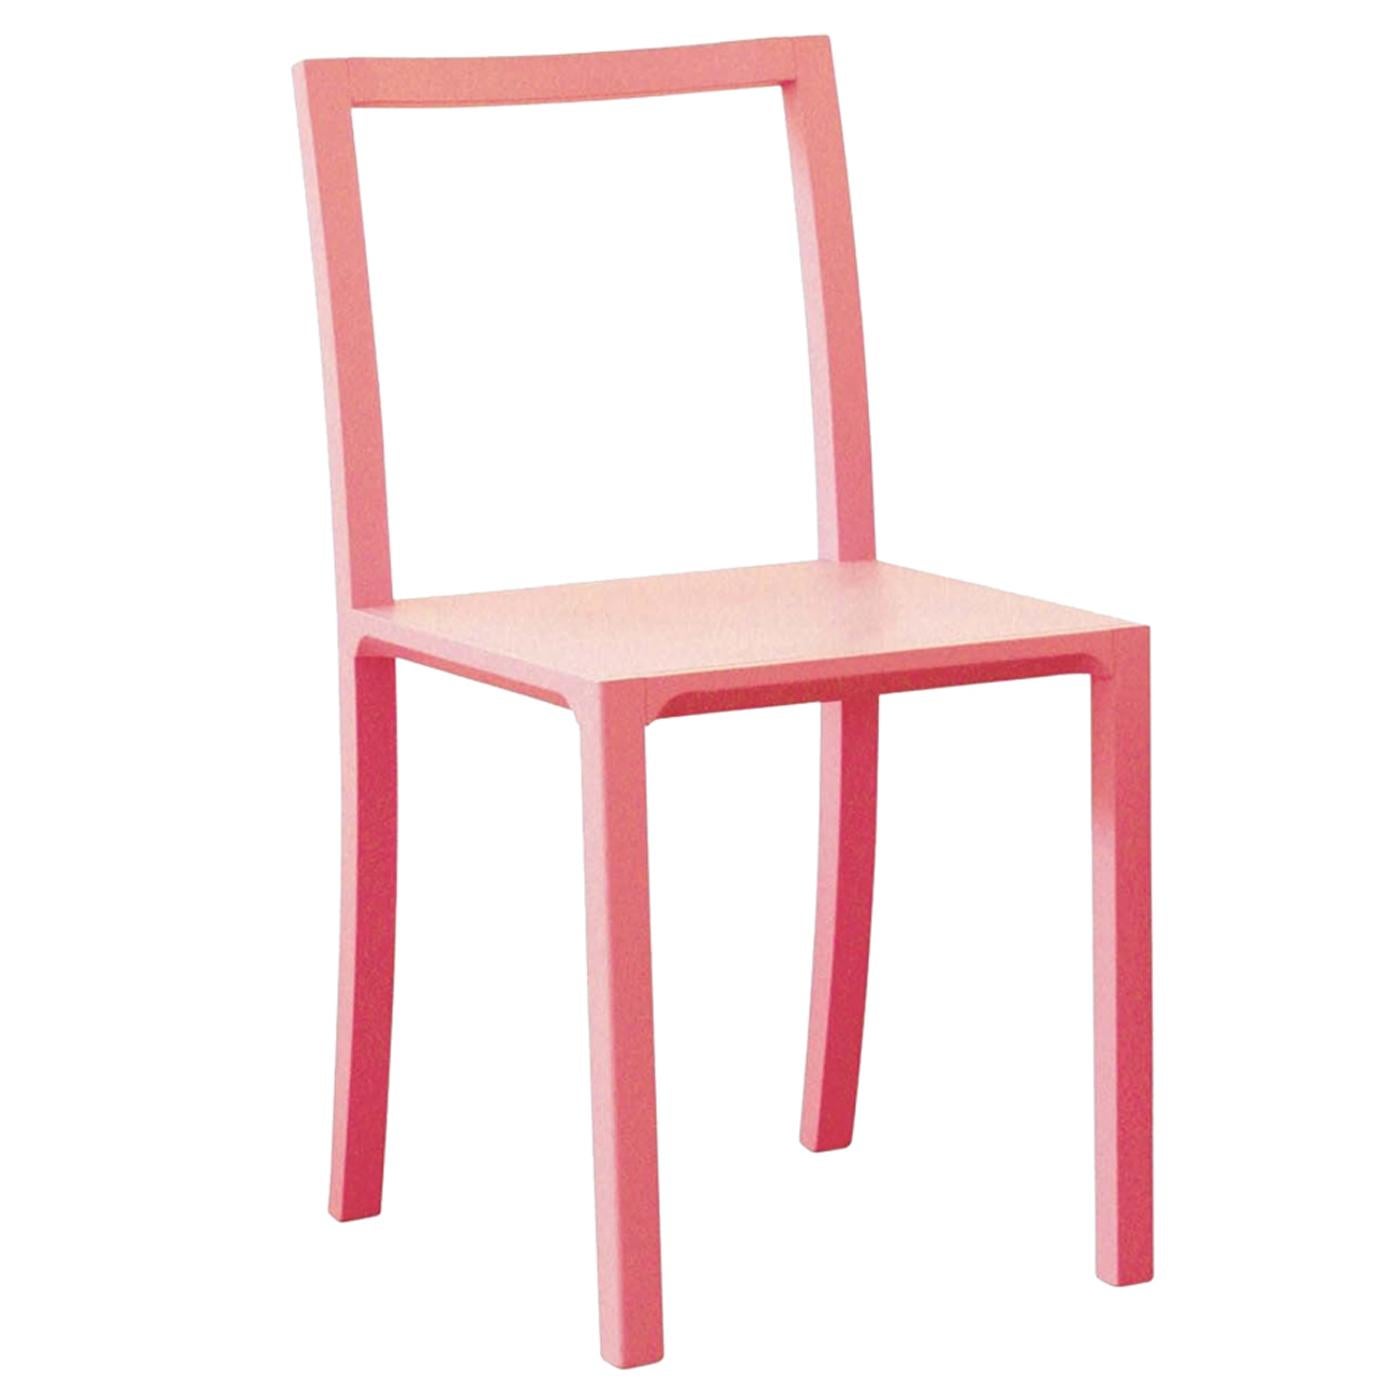 Framework Set of 2 Pink Chairs by Steffen Kehrle